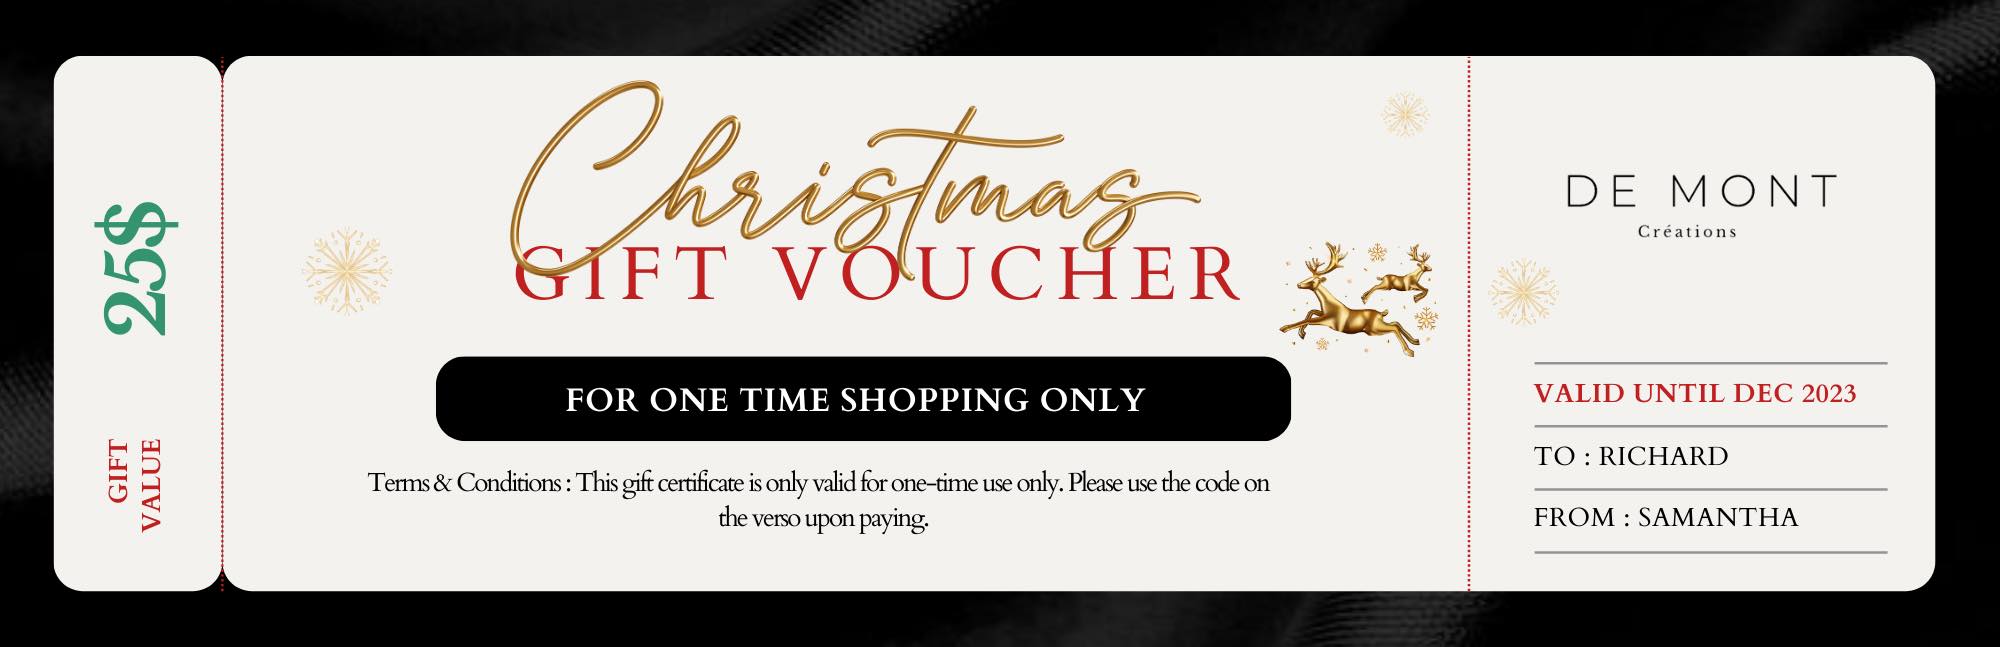 Gift Voucher - Christmas Edition